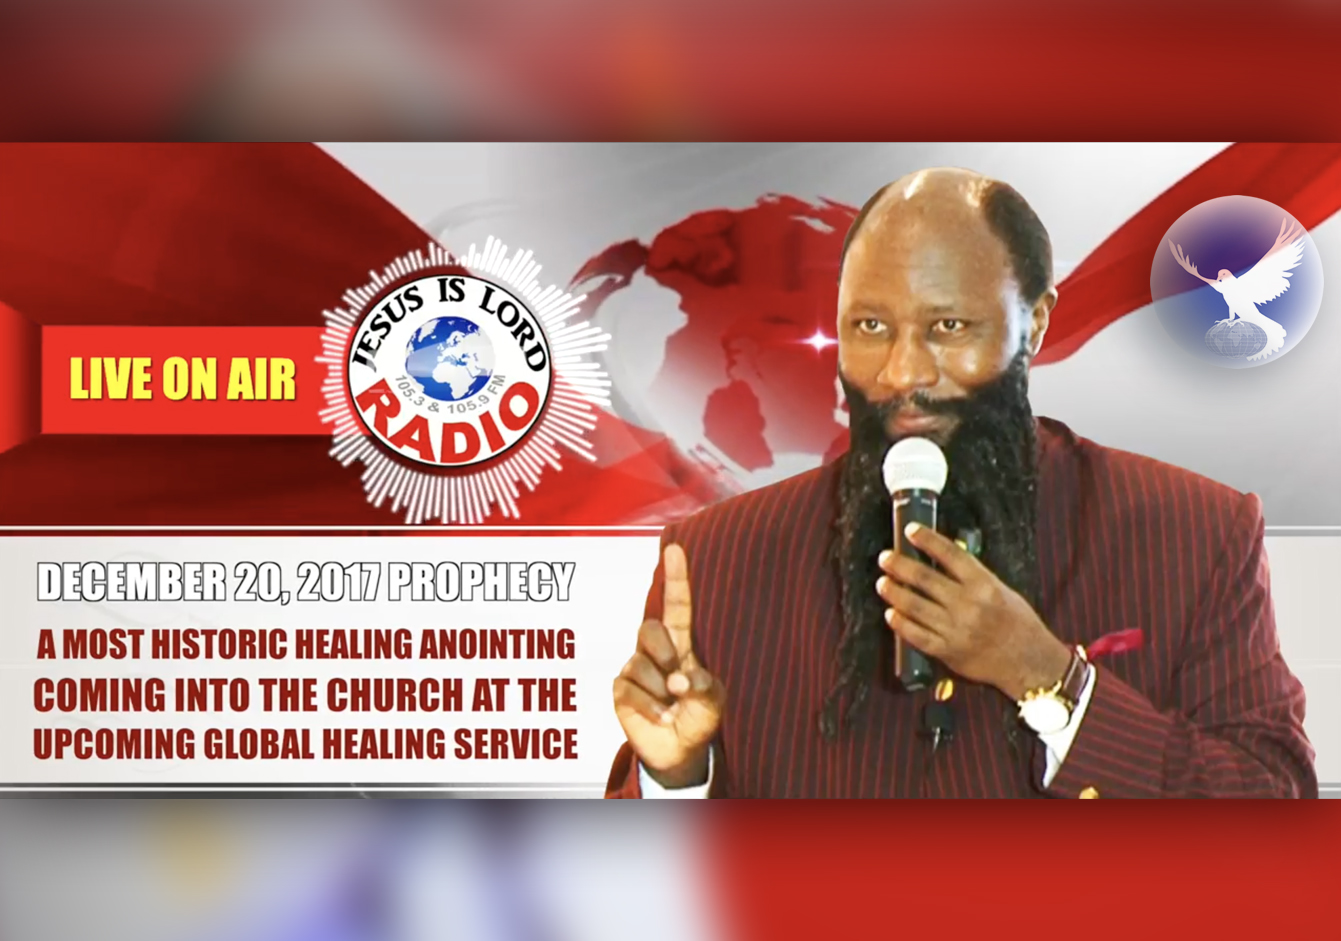 EPISODE 77 - PROPHECY OF HISTORIC HEALING ANOINTING COMING INTO THE CHURCH AT THE UPCOMING GLOBAL HEALING SERVICE(20DEC2017) - PROPHET DR. OWUOR